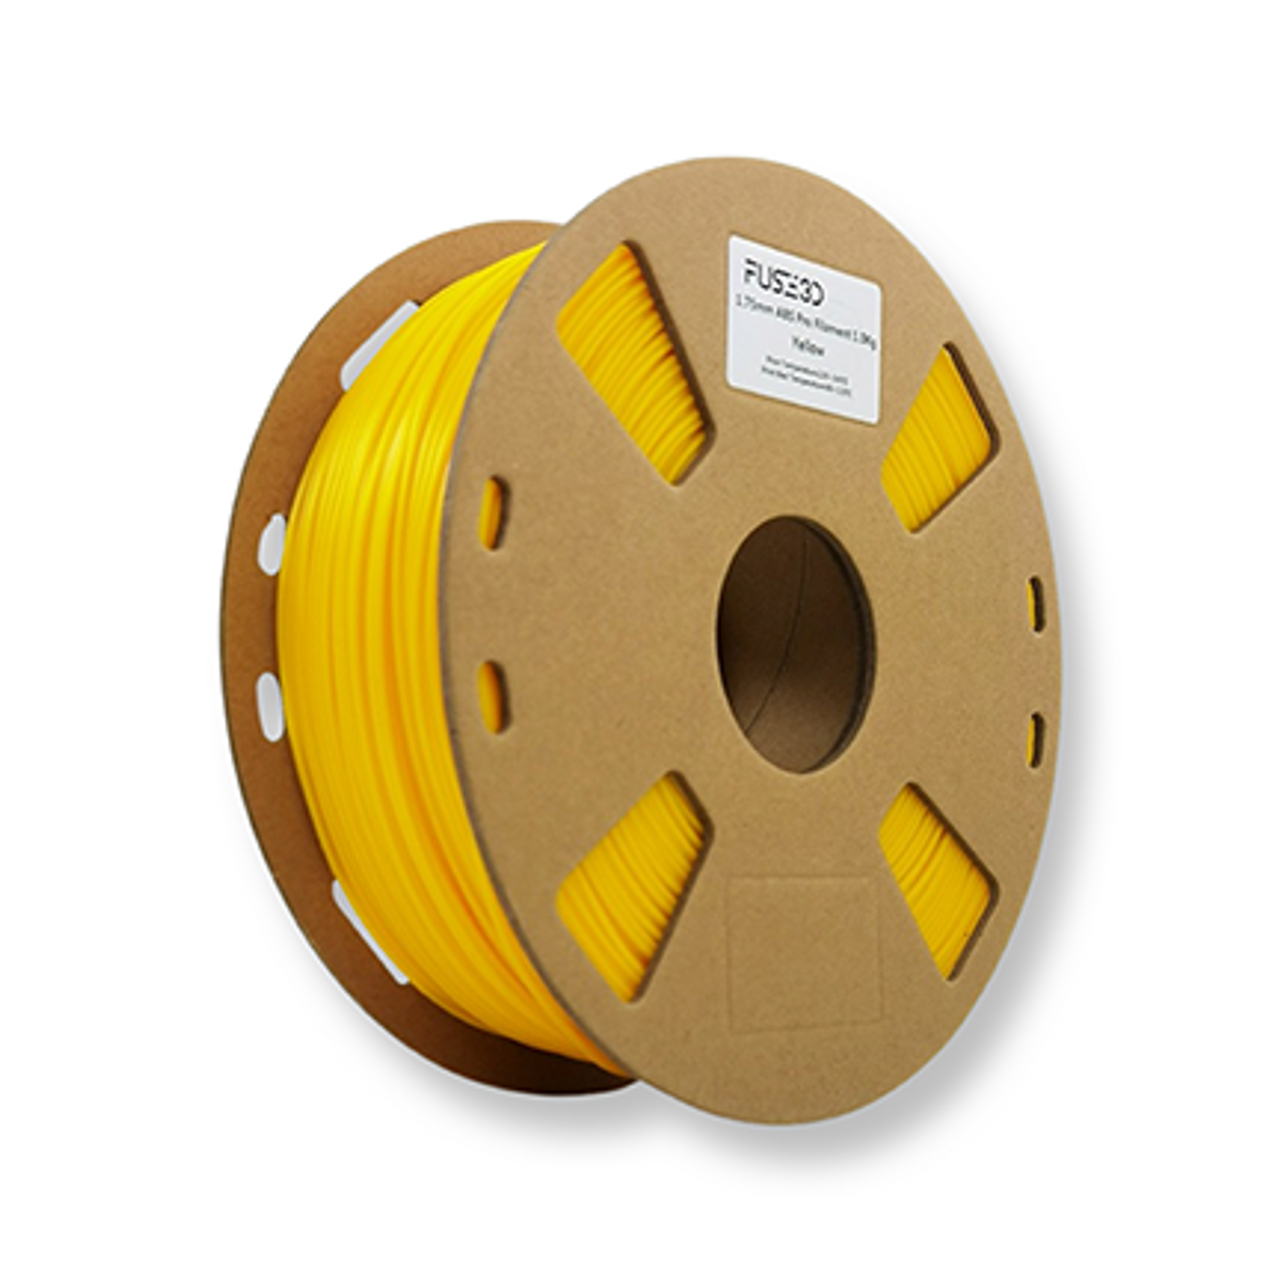 Fuse 3D ABS Pro Yellow 3D Printing Filament